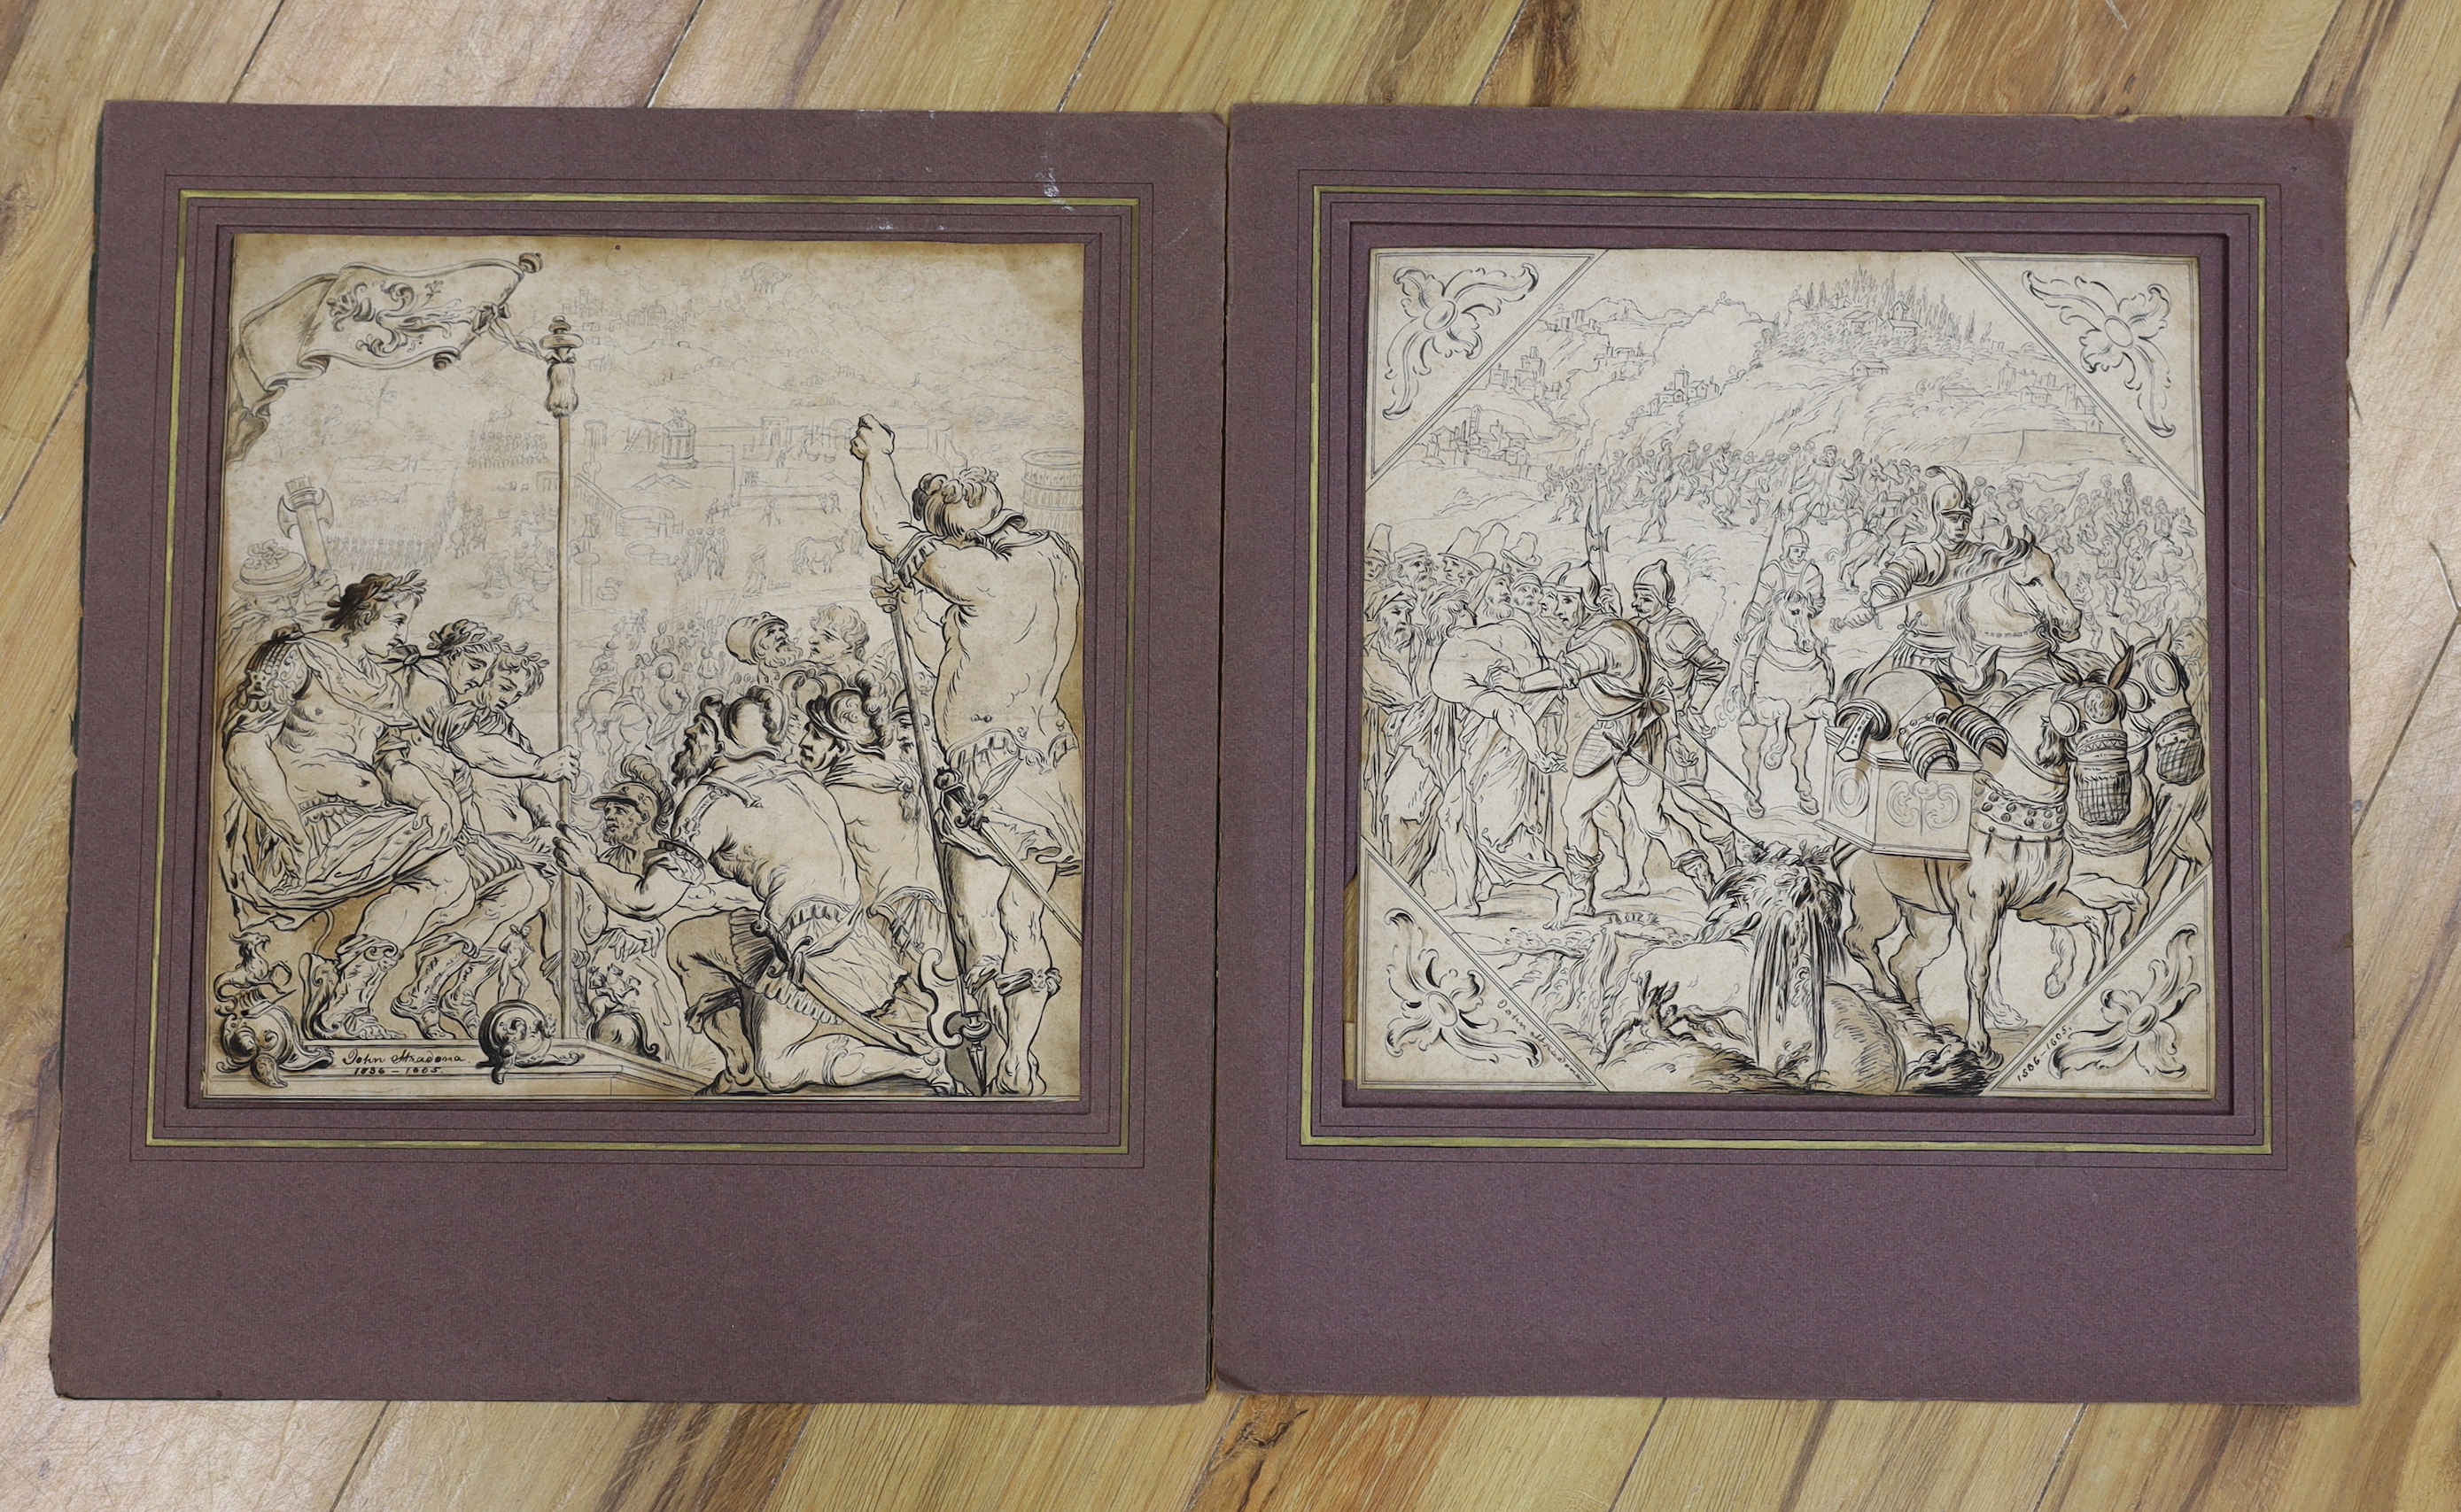 Follower of Jan van der Straet (Stradanus, 1536-1605), pair of Old Master ink and washes on paper, Battle scenes, each signed in ink, mounted, 36 x 36cm, unframed